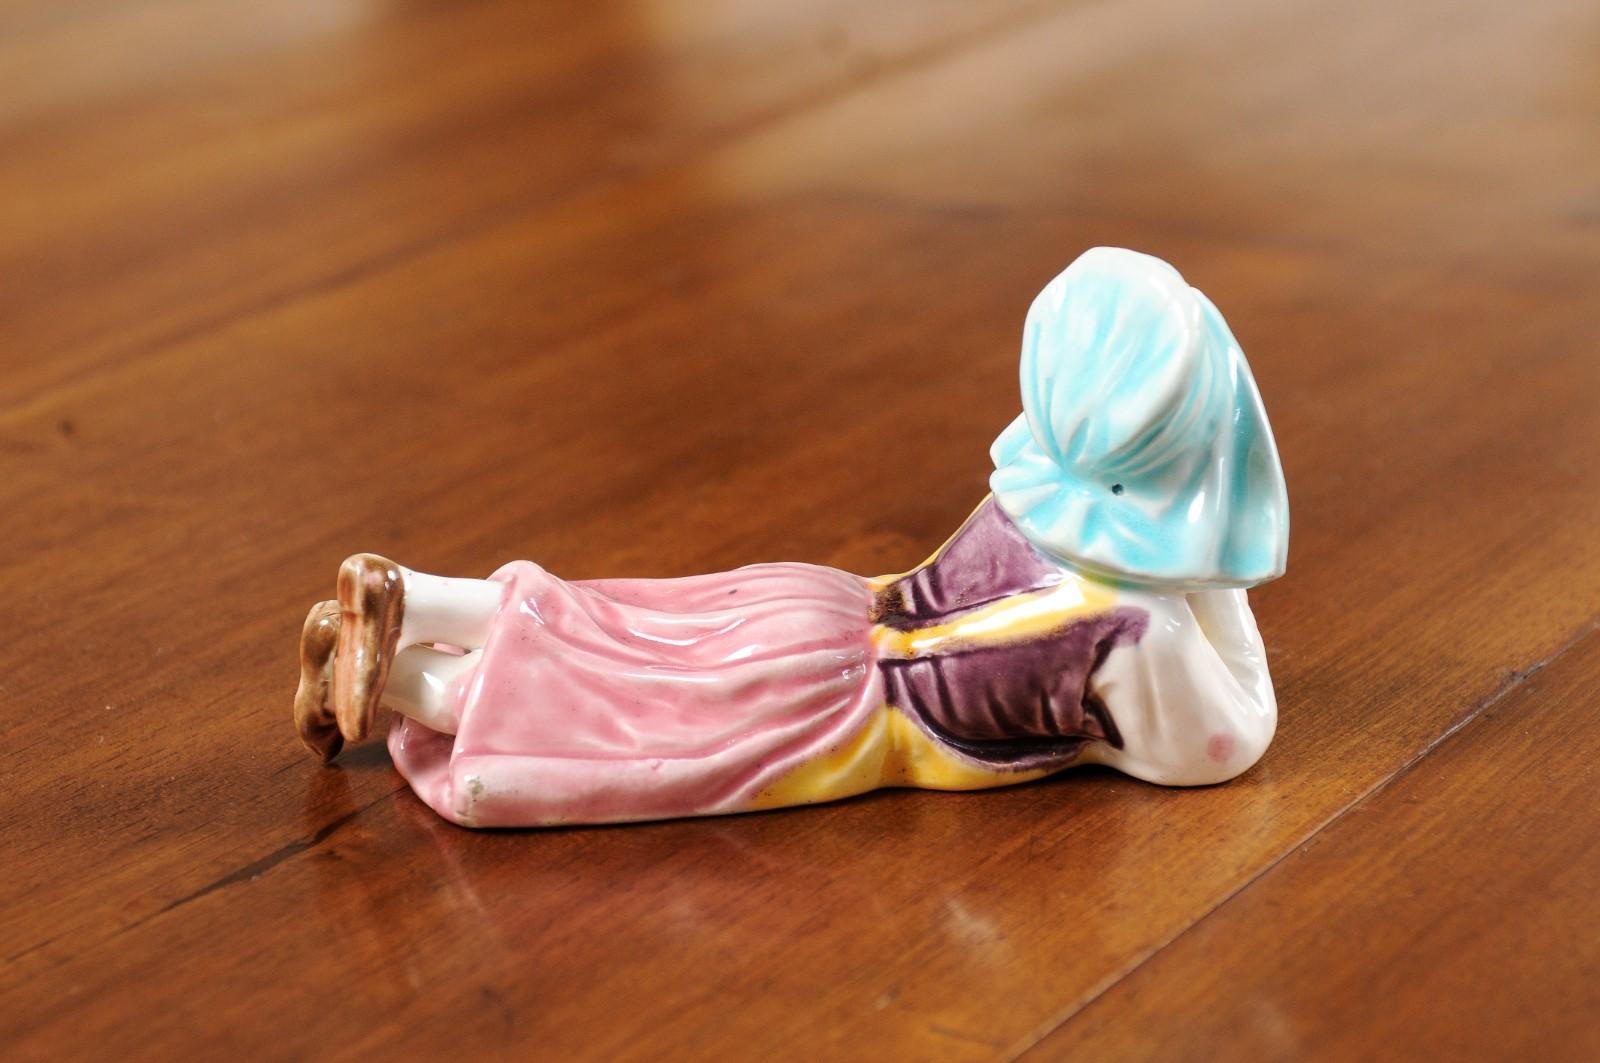 Petite English Porcelain Figurine Depicting a Young Girl Laying on the Ground For Sale 2